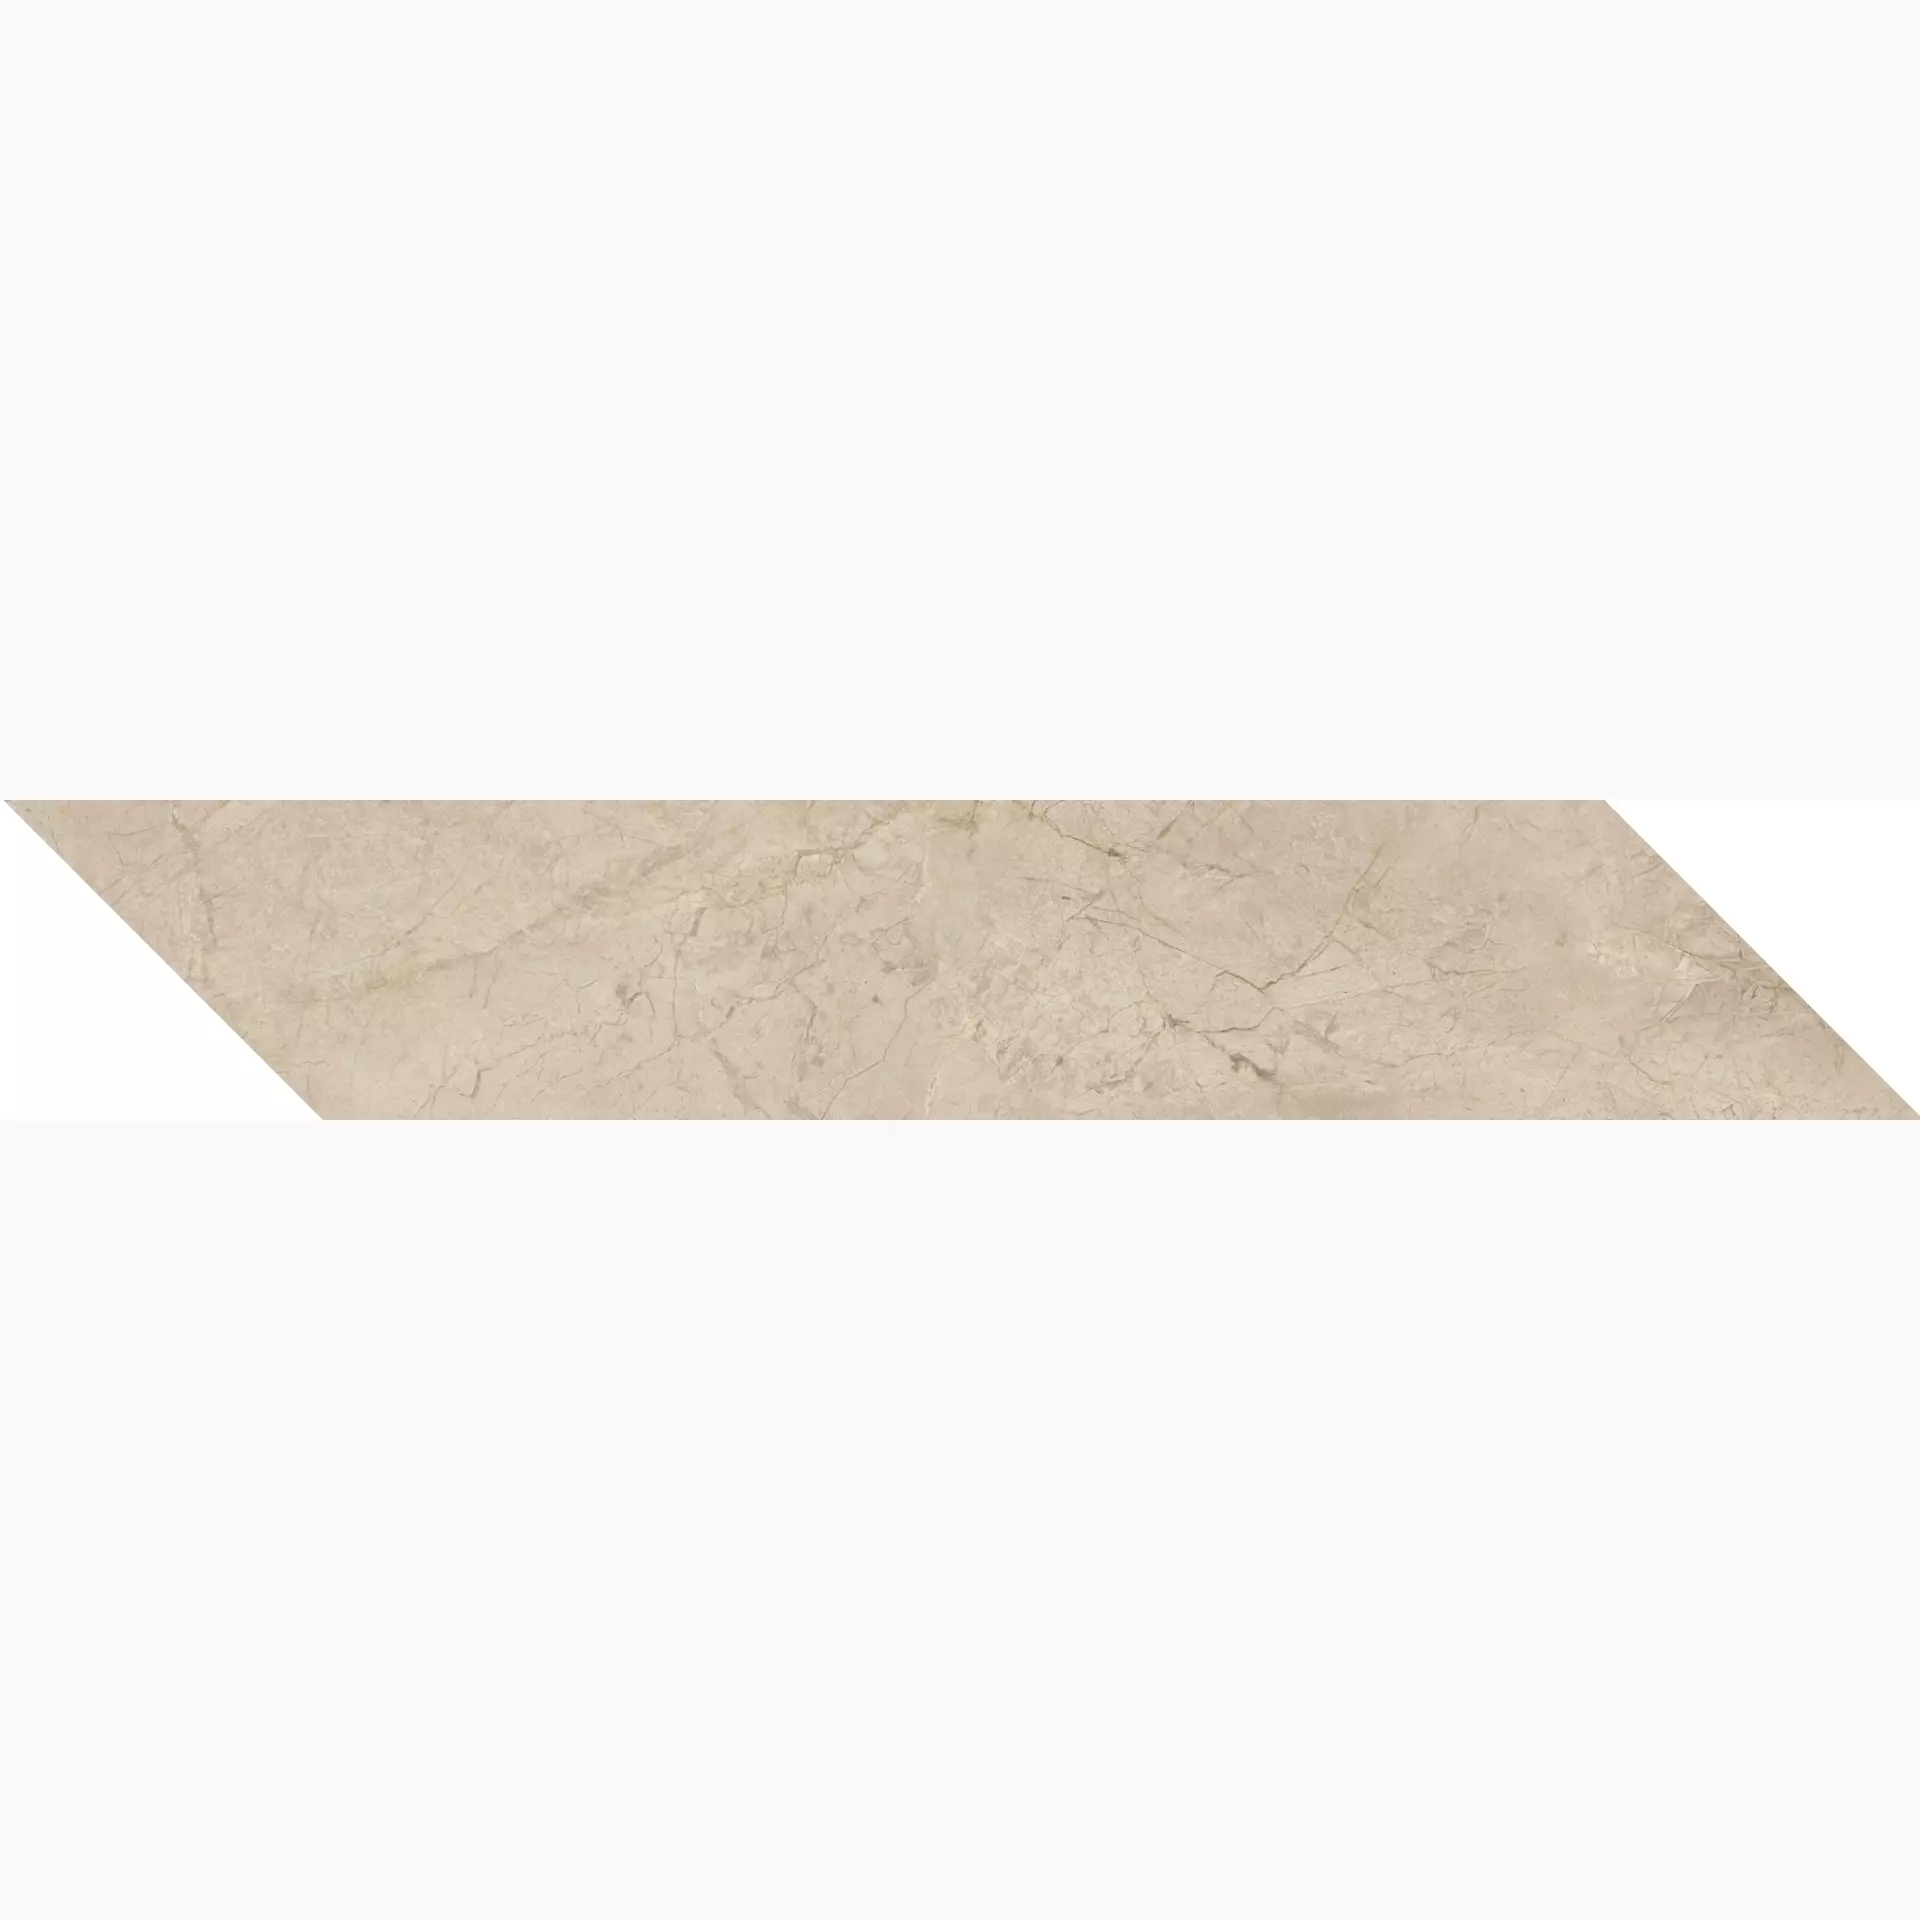 Keope Elements Lux Crema Beige Lappato Chevron Left 54334132 10x60cm rectified 9mm